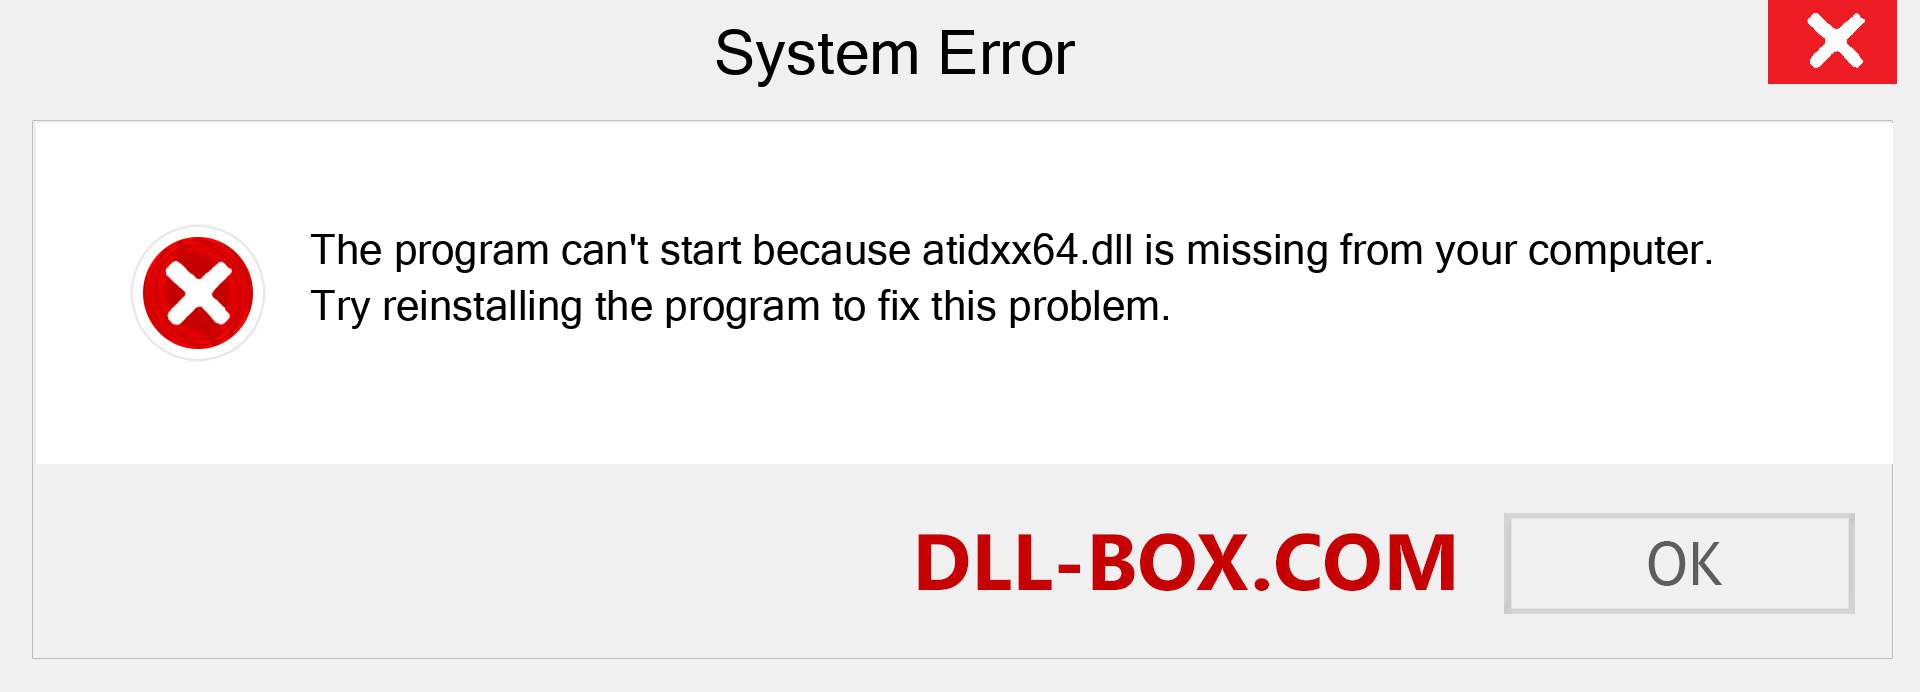  atidxx64.dll file is missing?. Download for Windows 7, 8, 10 - Fix  atidxx64 dll Missing Error on Windows, photos, images